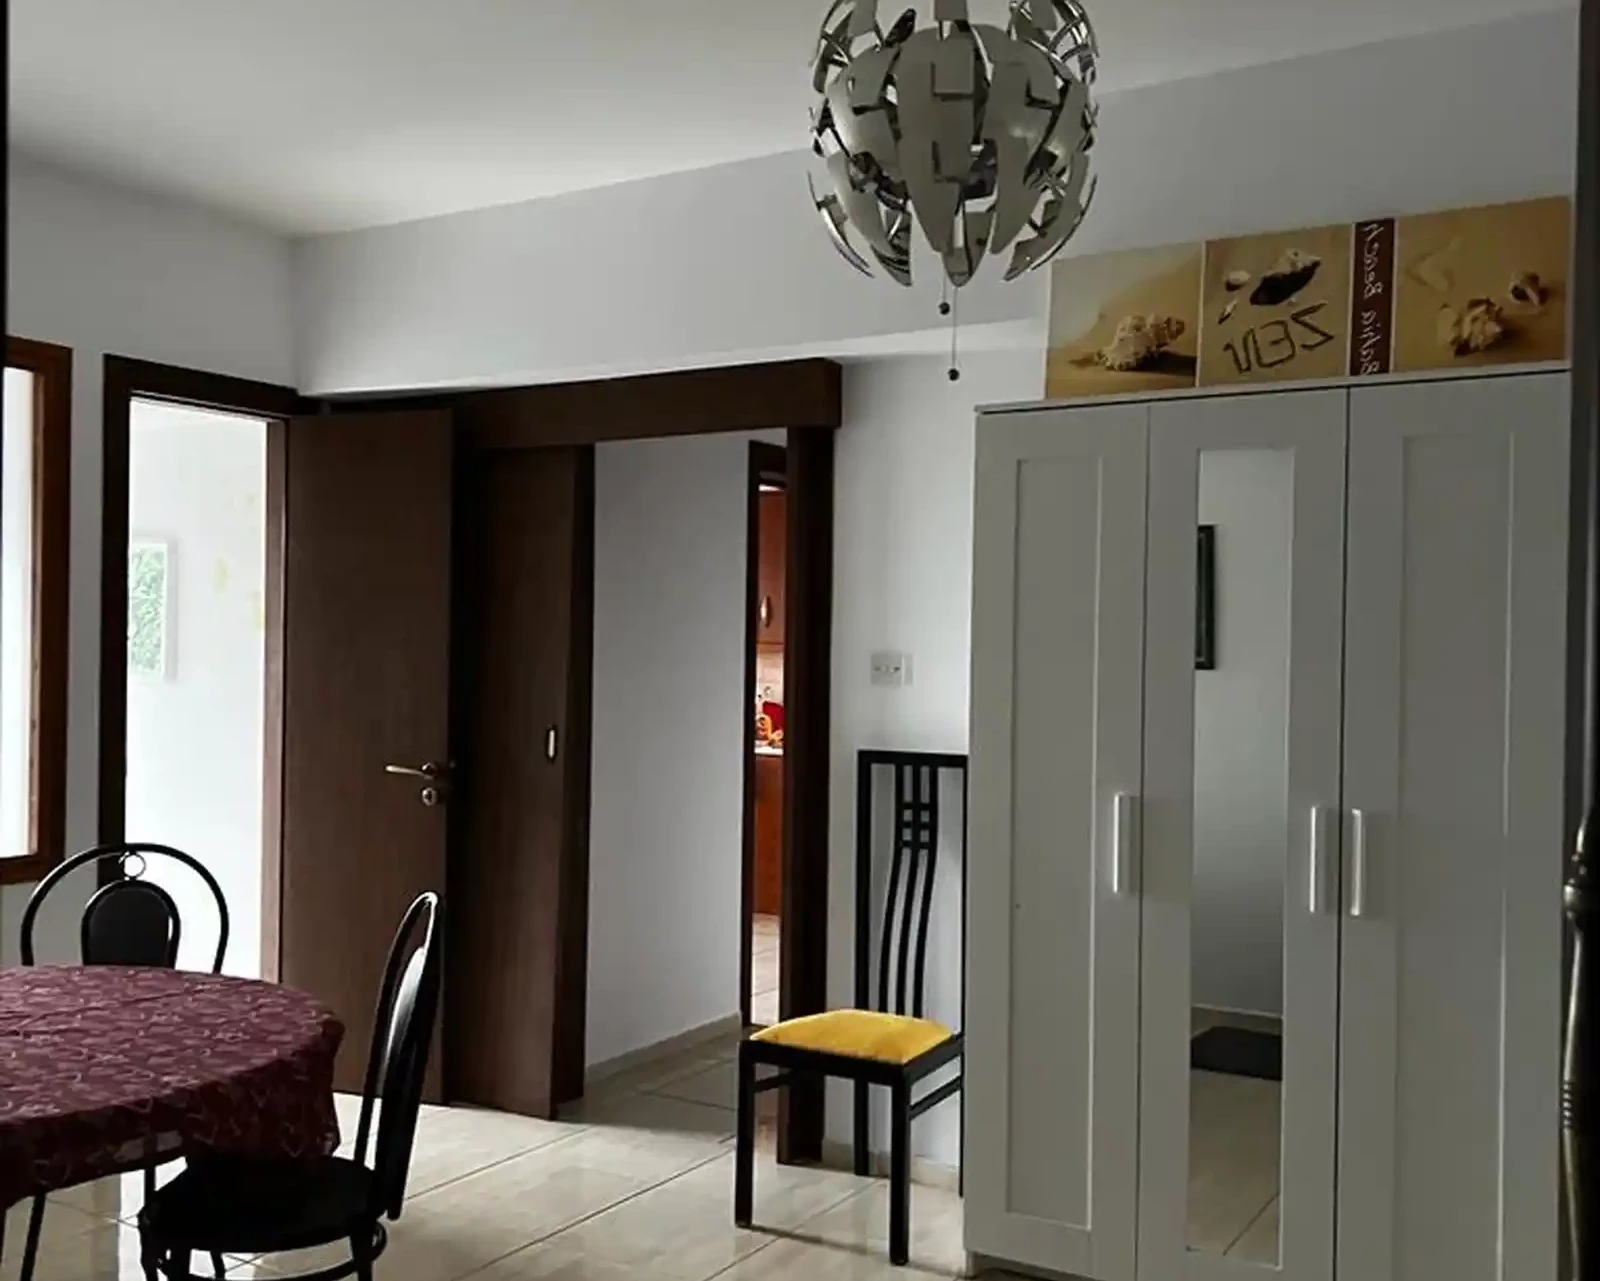 3-bedroom apartment fоr sаle €150.000, image 1